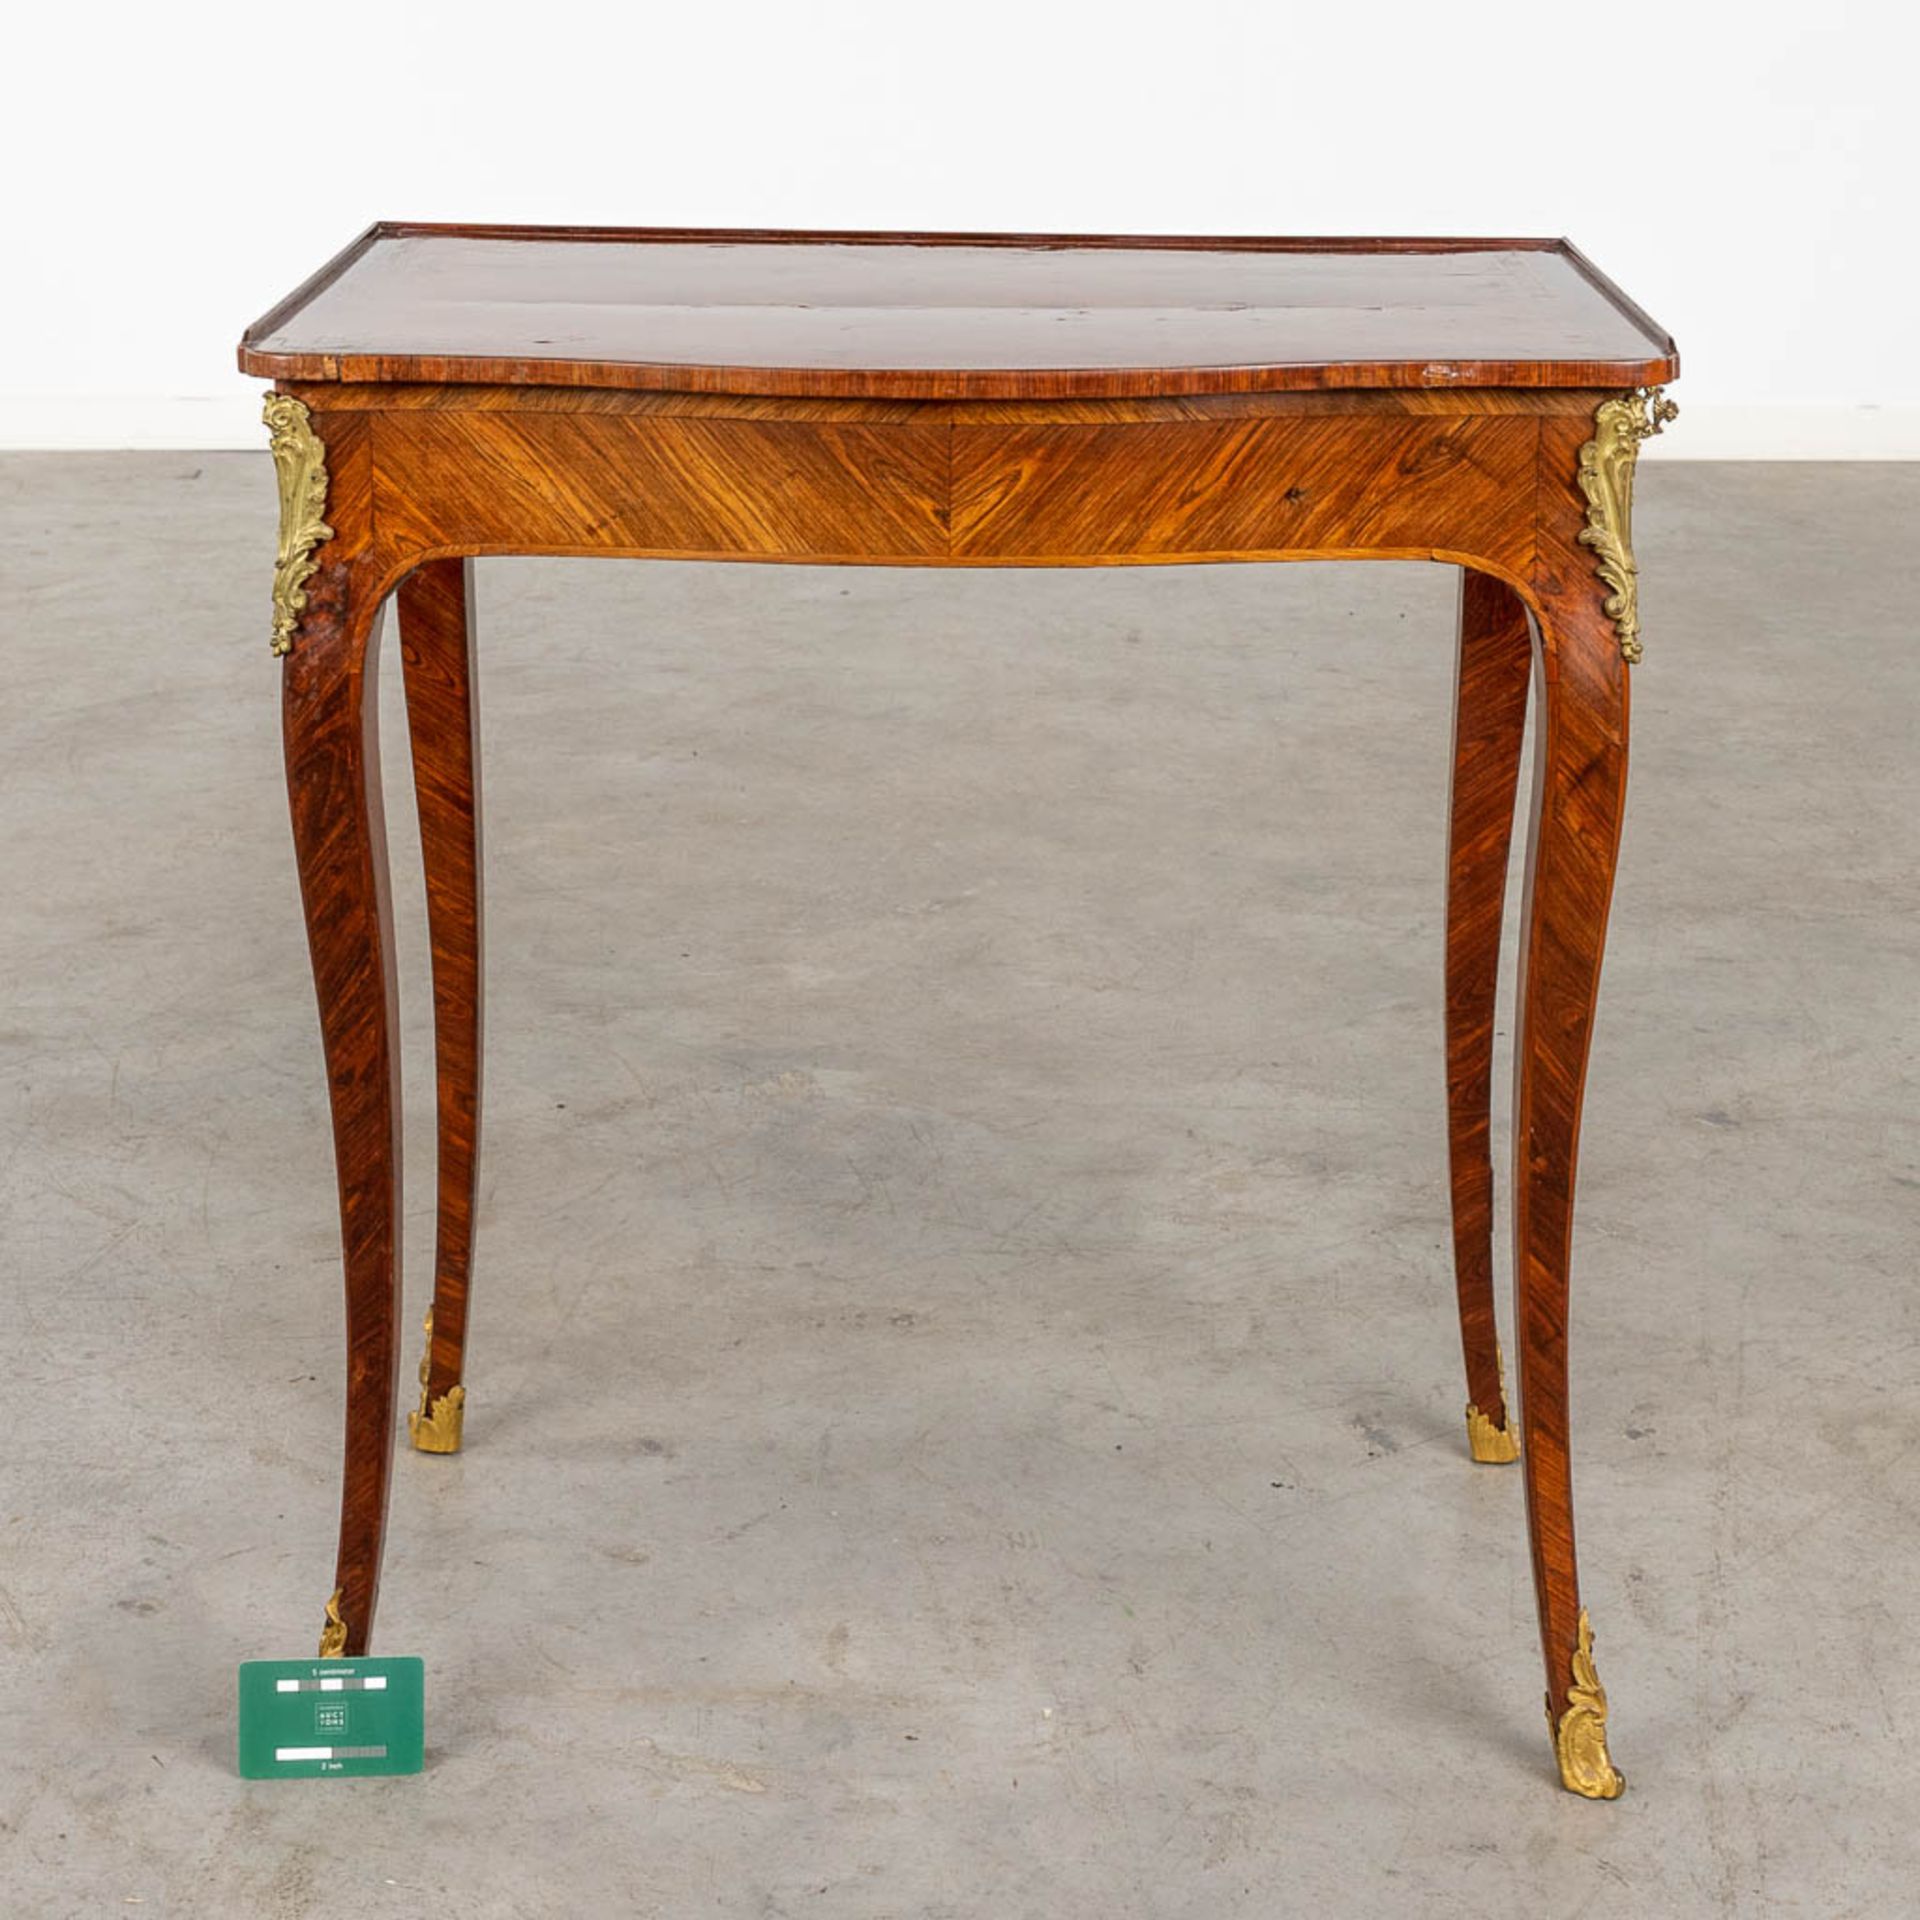 An antique side table, Louis XV, marquetry mounted with bronze, 18th C. (D:43 x W:64 x H: - Image 2 of 14